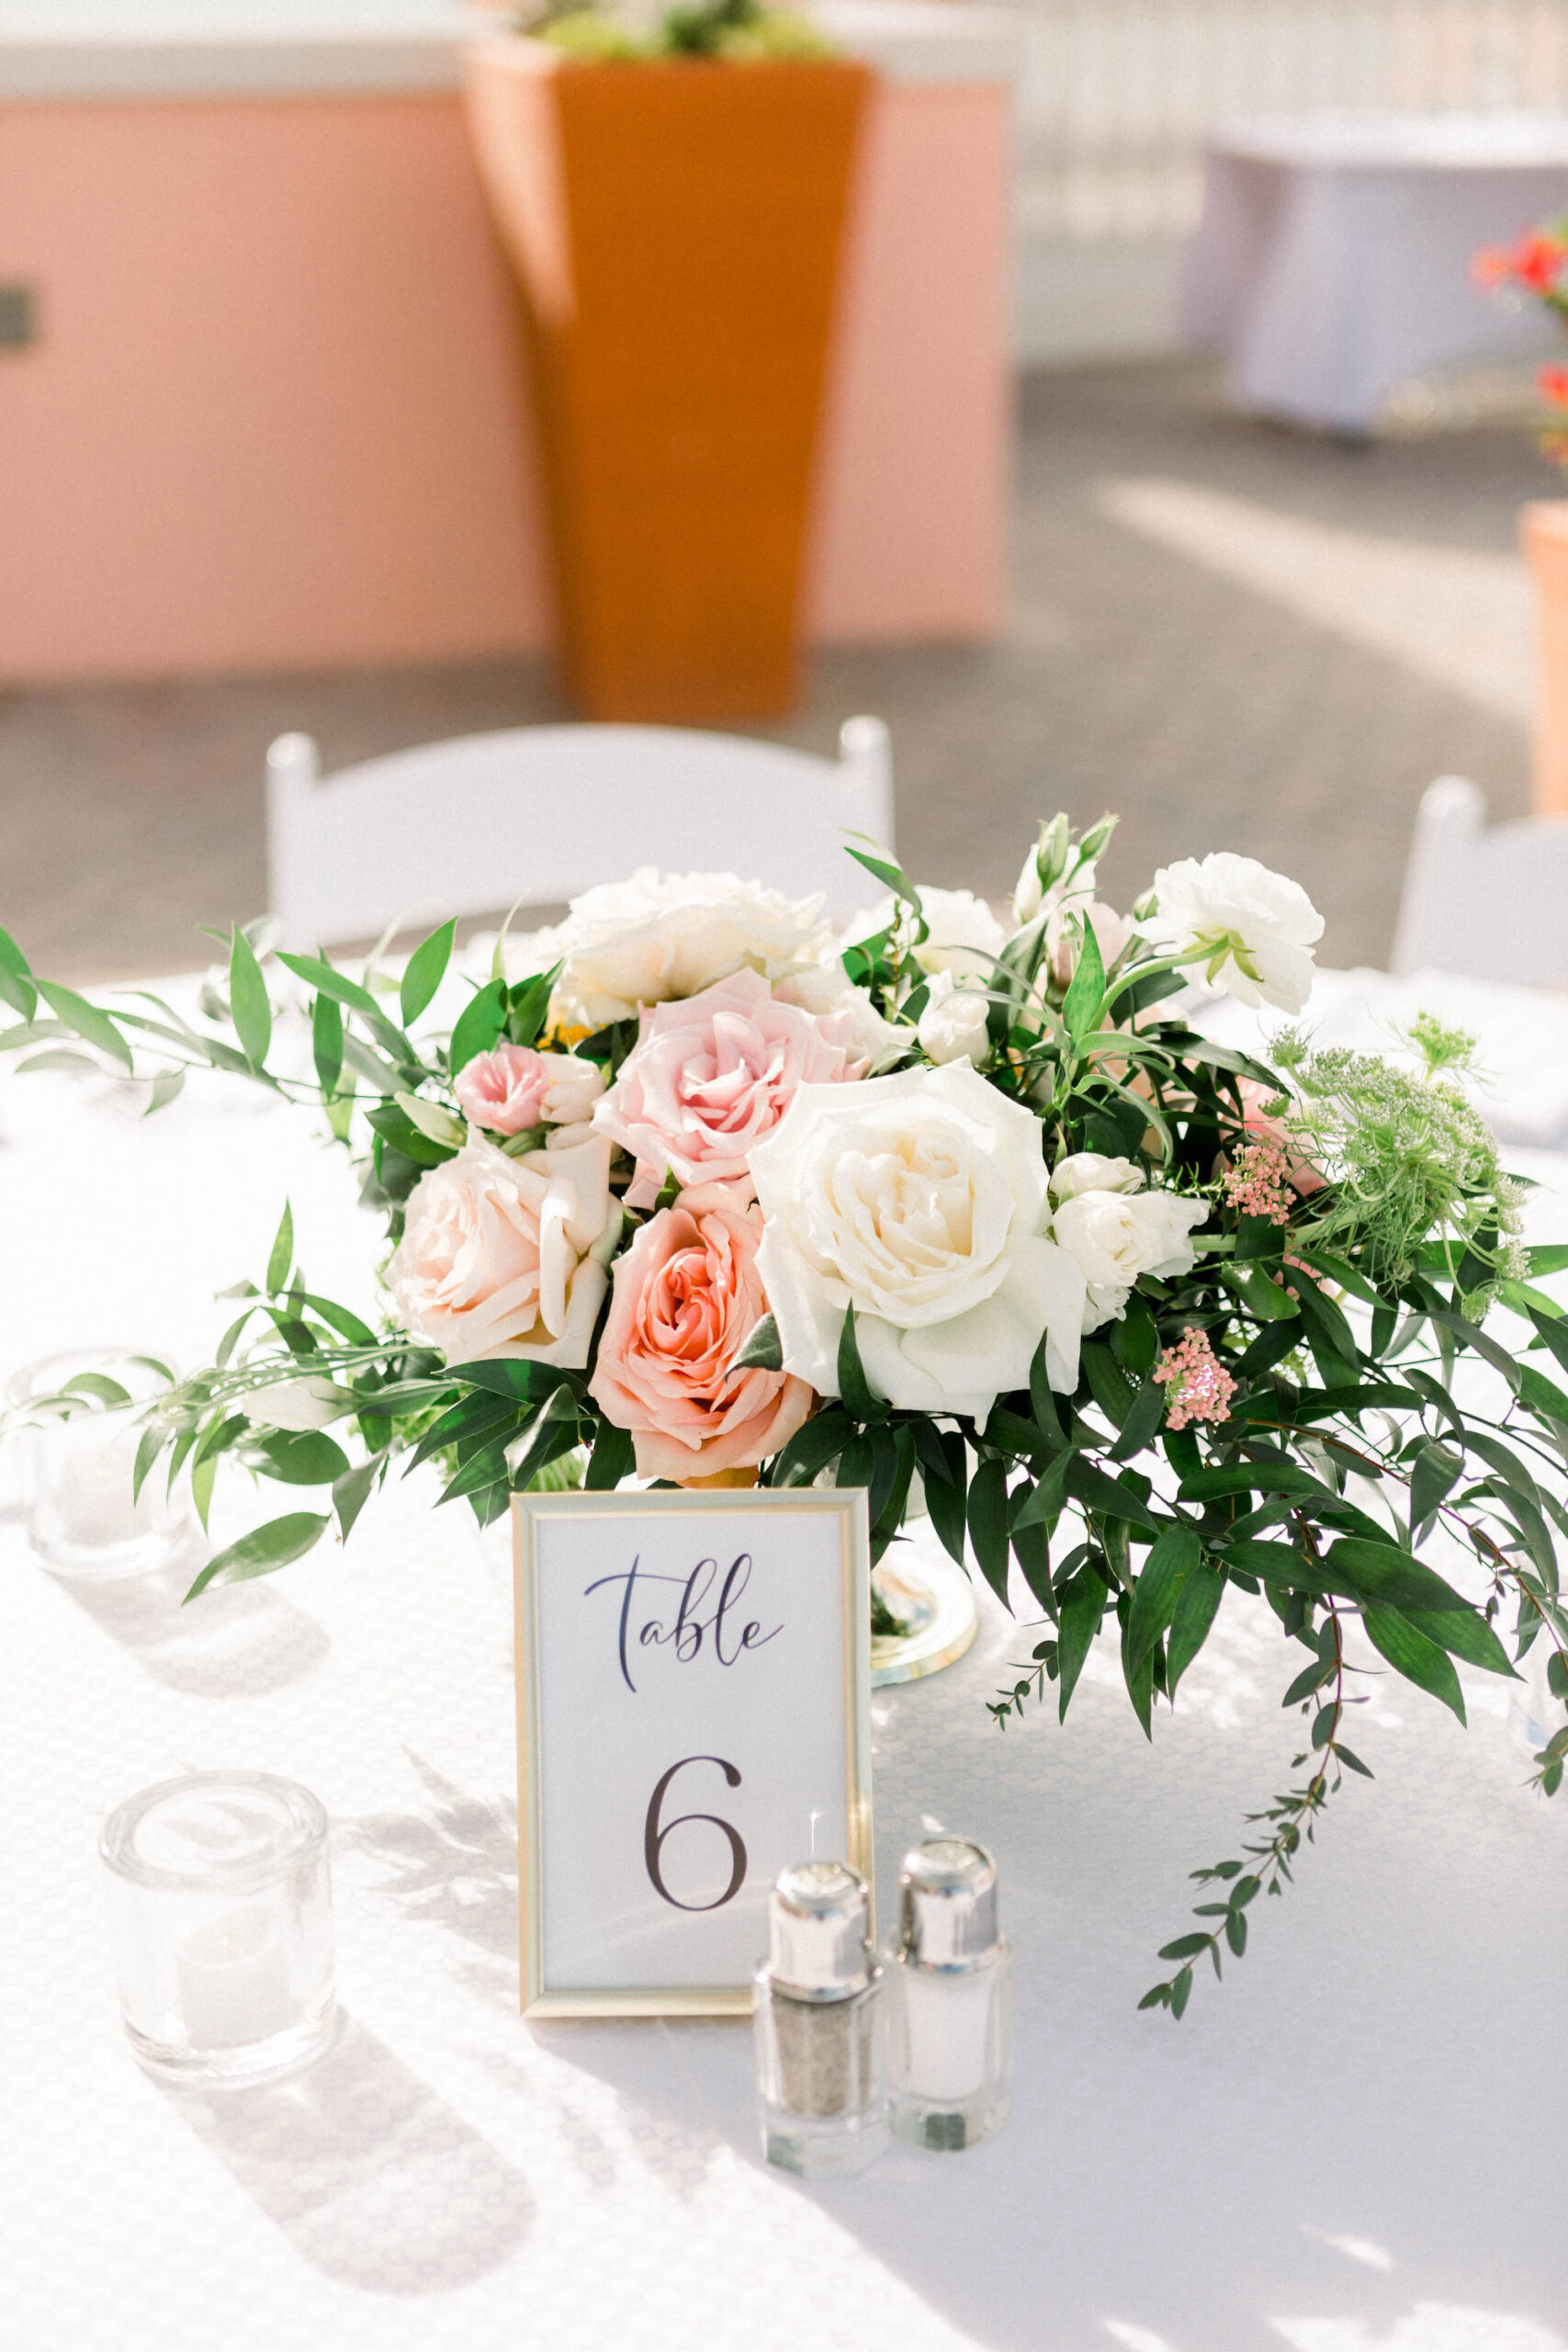 Pastel Spring Pink Roses with Greenery Centerpieces | Gold Frame Table Numbers Reception Decor Ideas